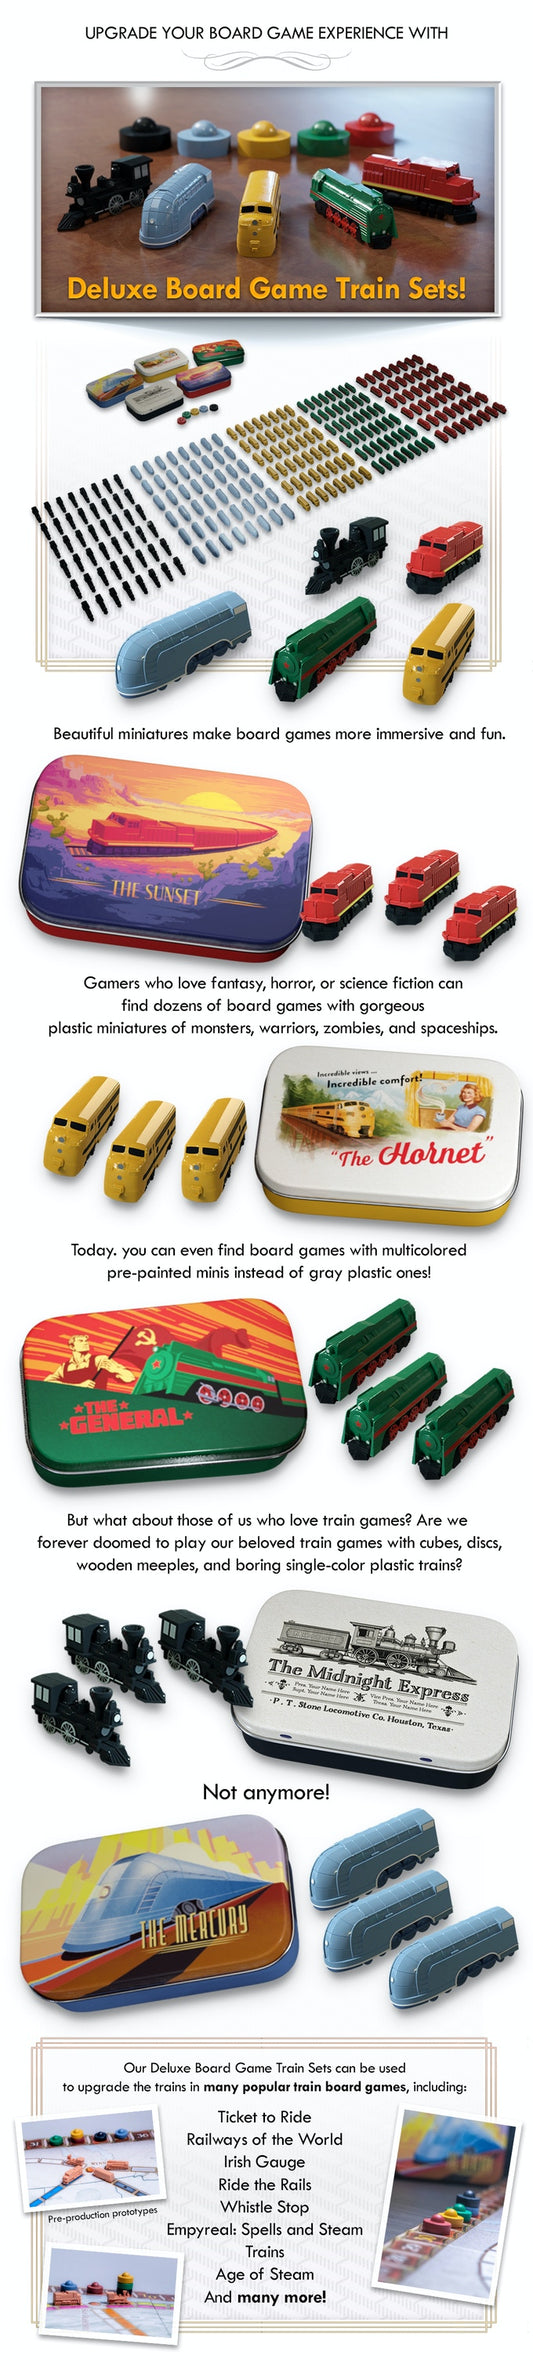 Little Plastic Train Company Deluxe Board Game Train Sets: The Sunset